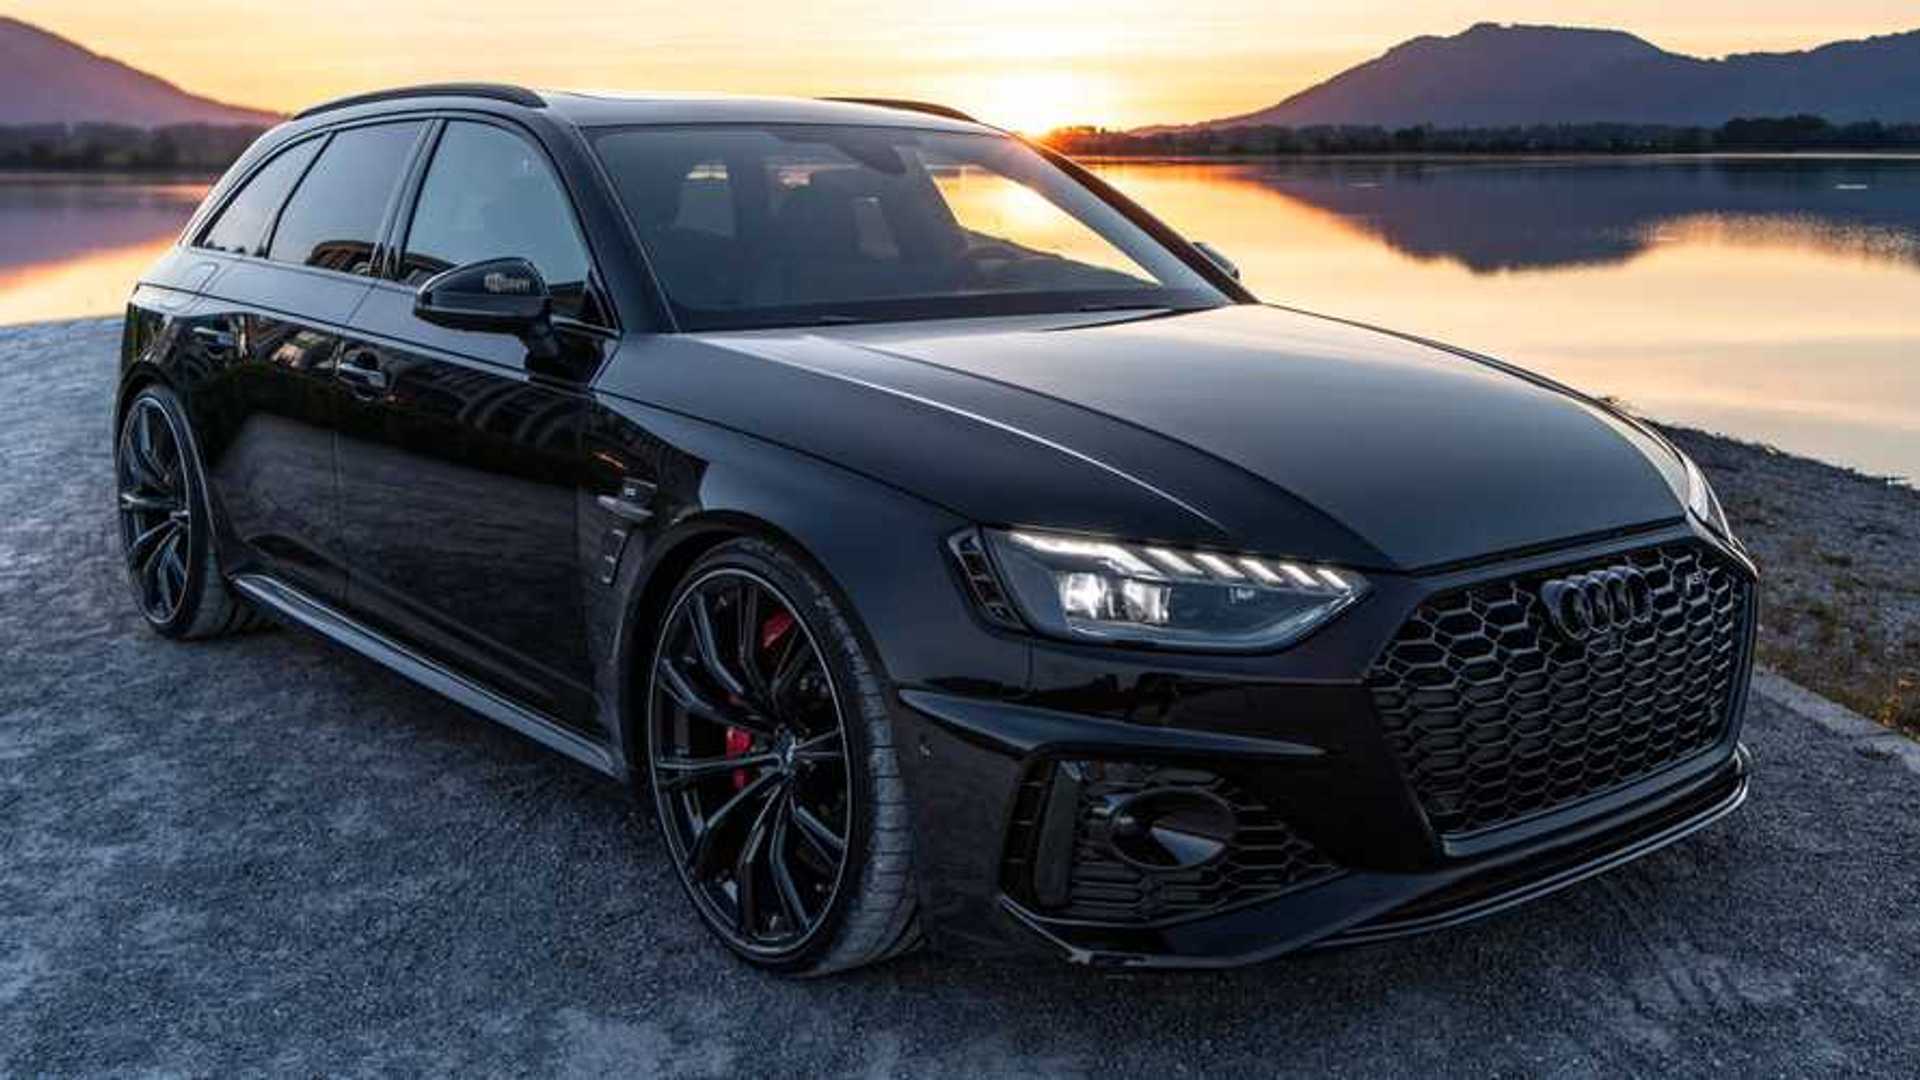 2020 Audi RS4 Avant Tuned By ABT Is Pure Evil With All-Black Look